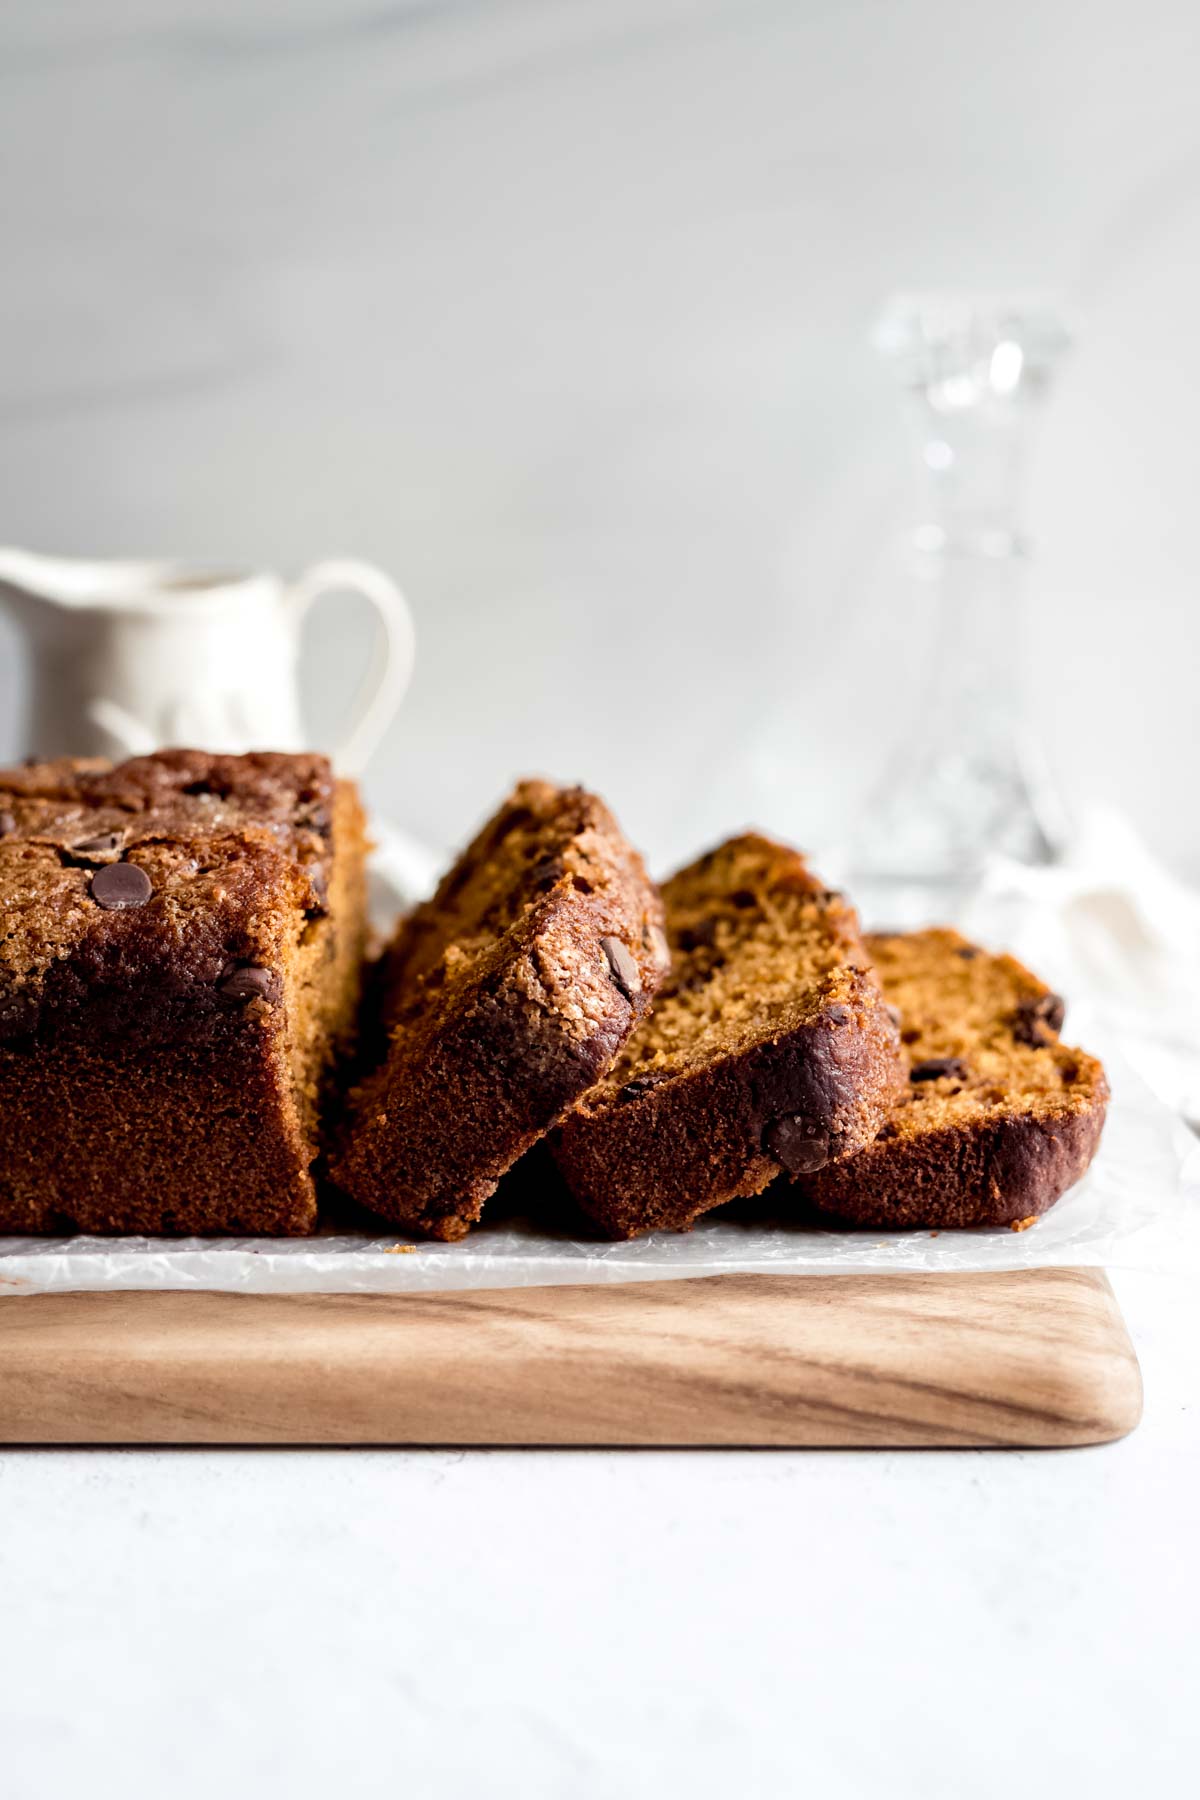 Chocolate Chip Pumpkin Bread sliced from the side